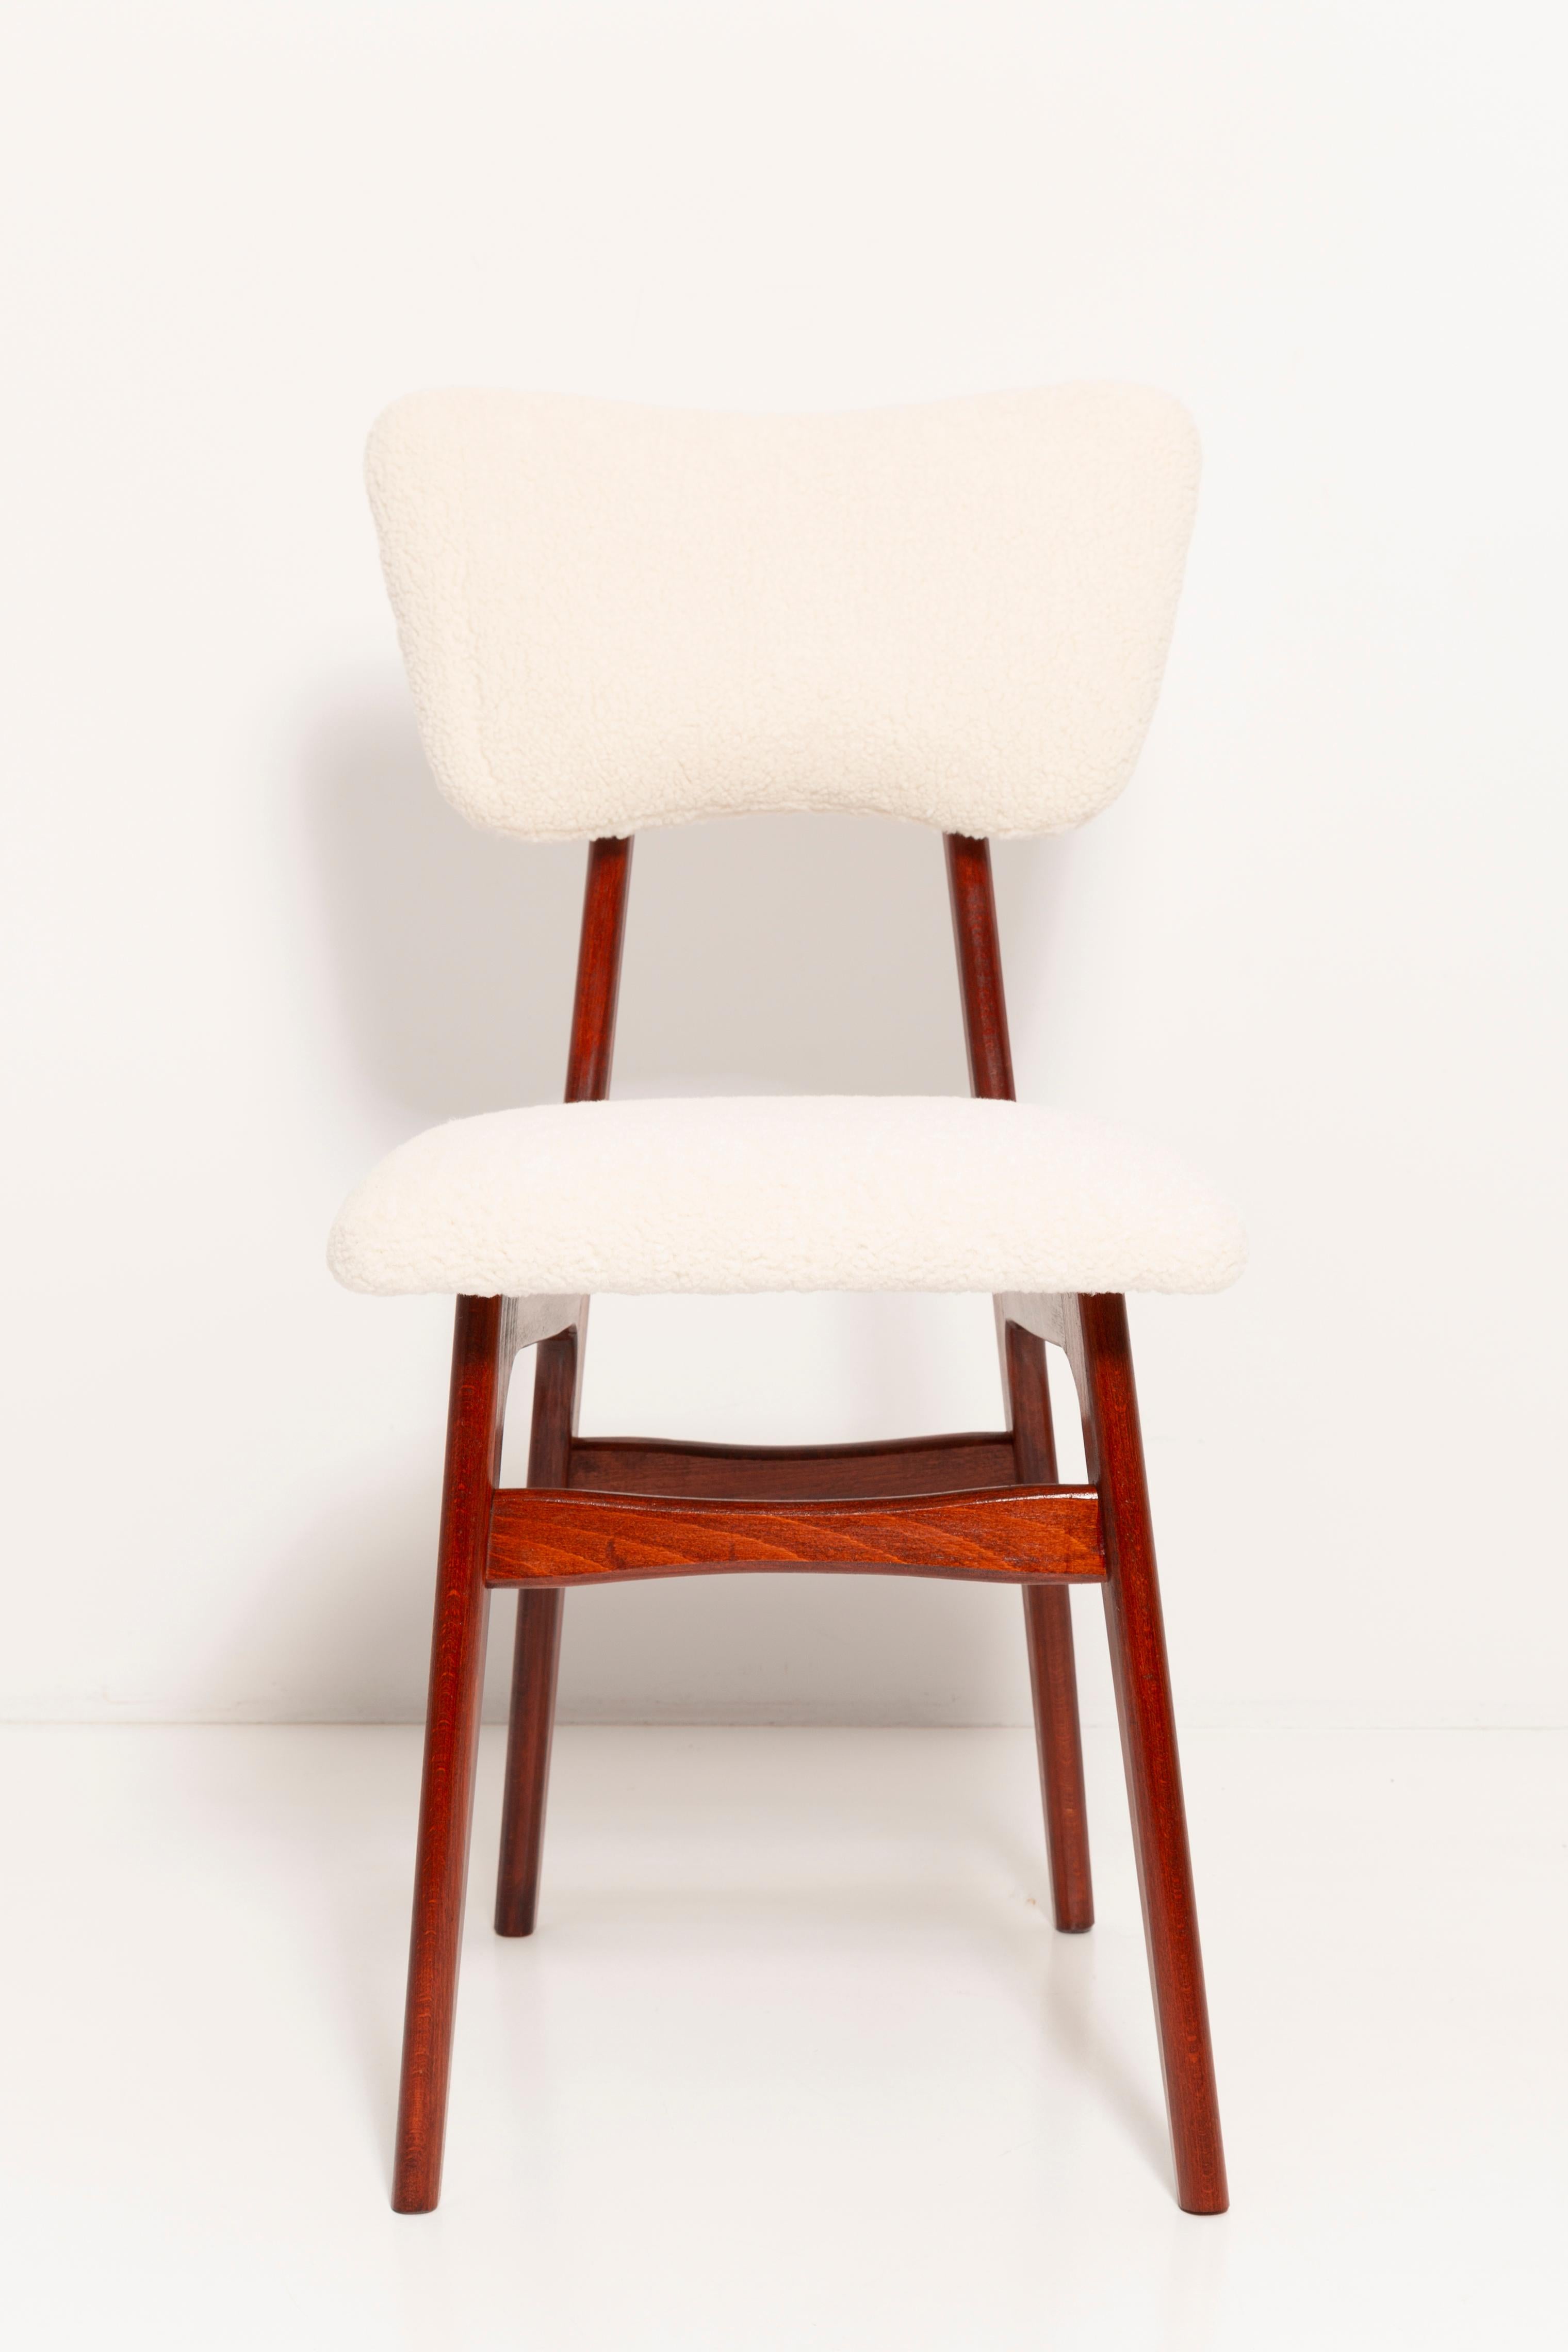 Twelve 20th Century Cream Boucle and Cherry Wood Butterfly Chairs, 1960s, Europe For Sale 10